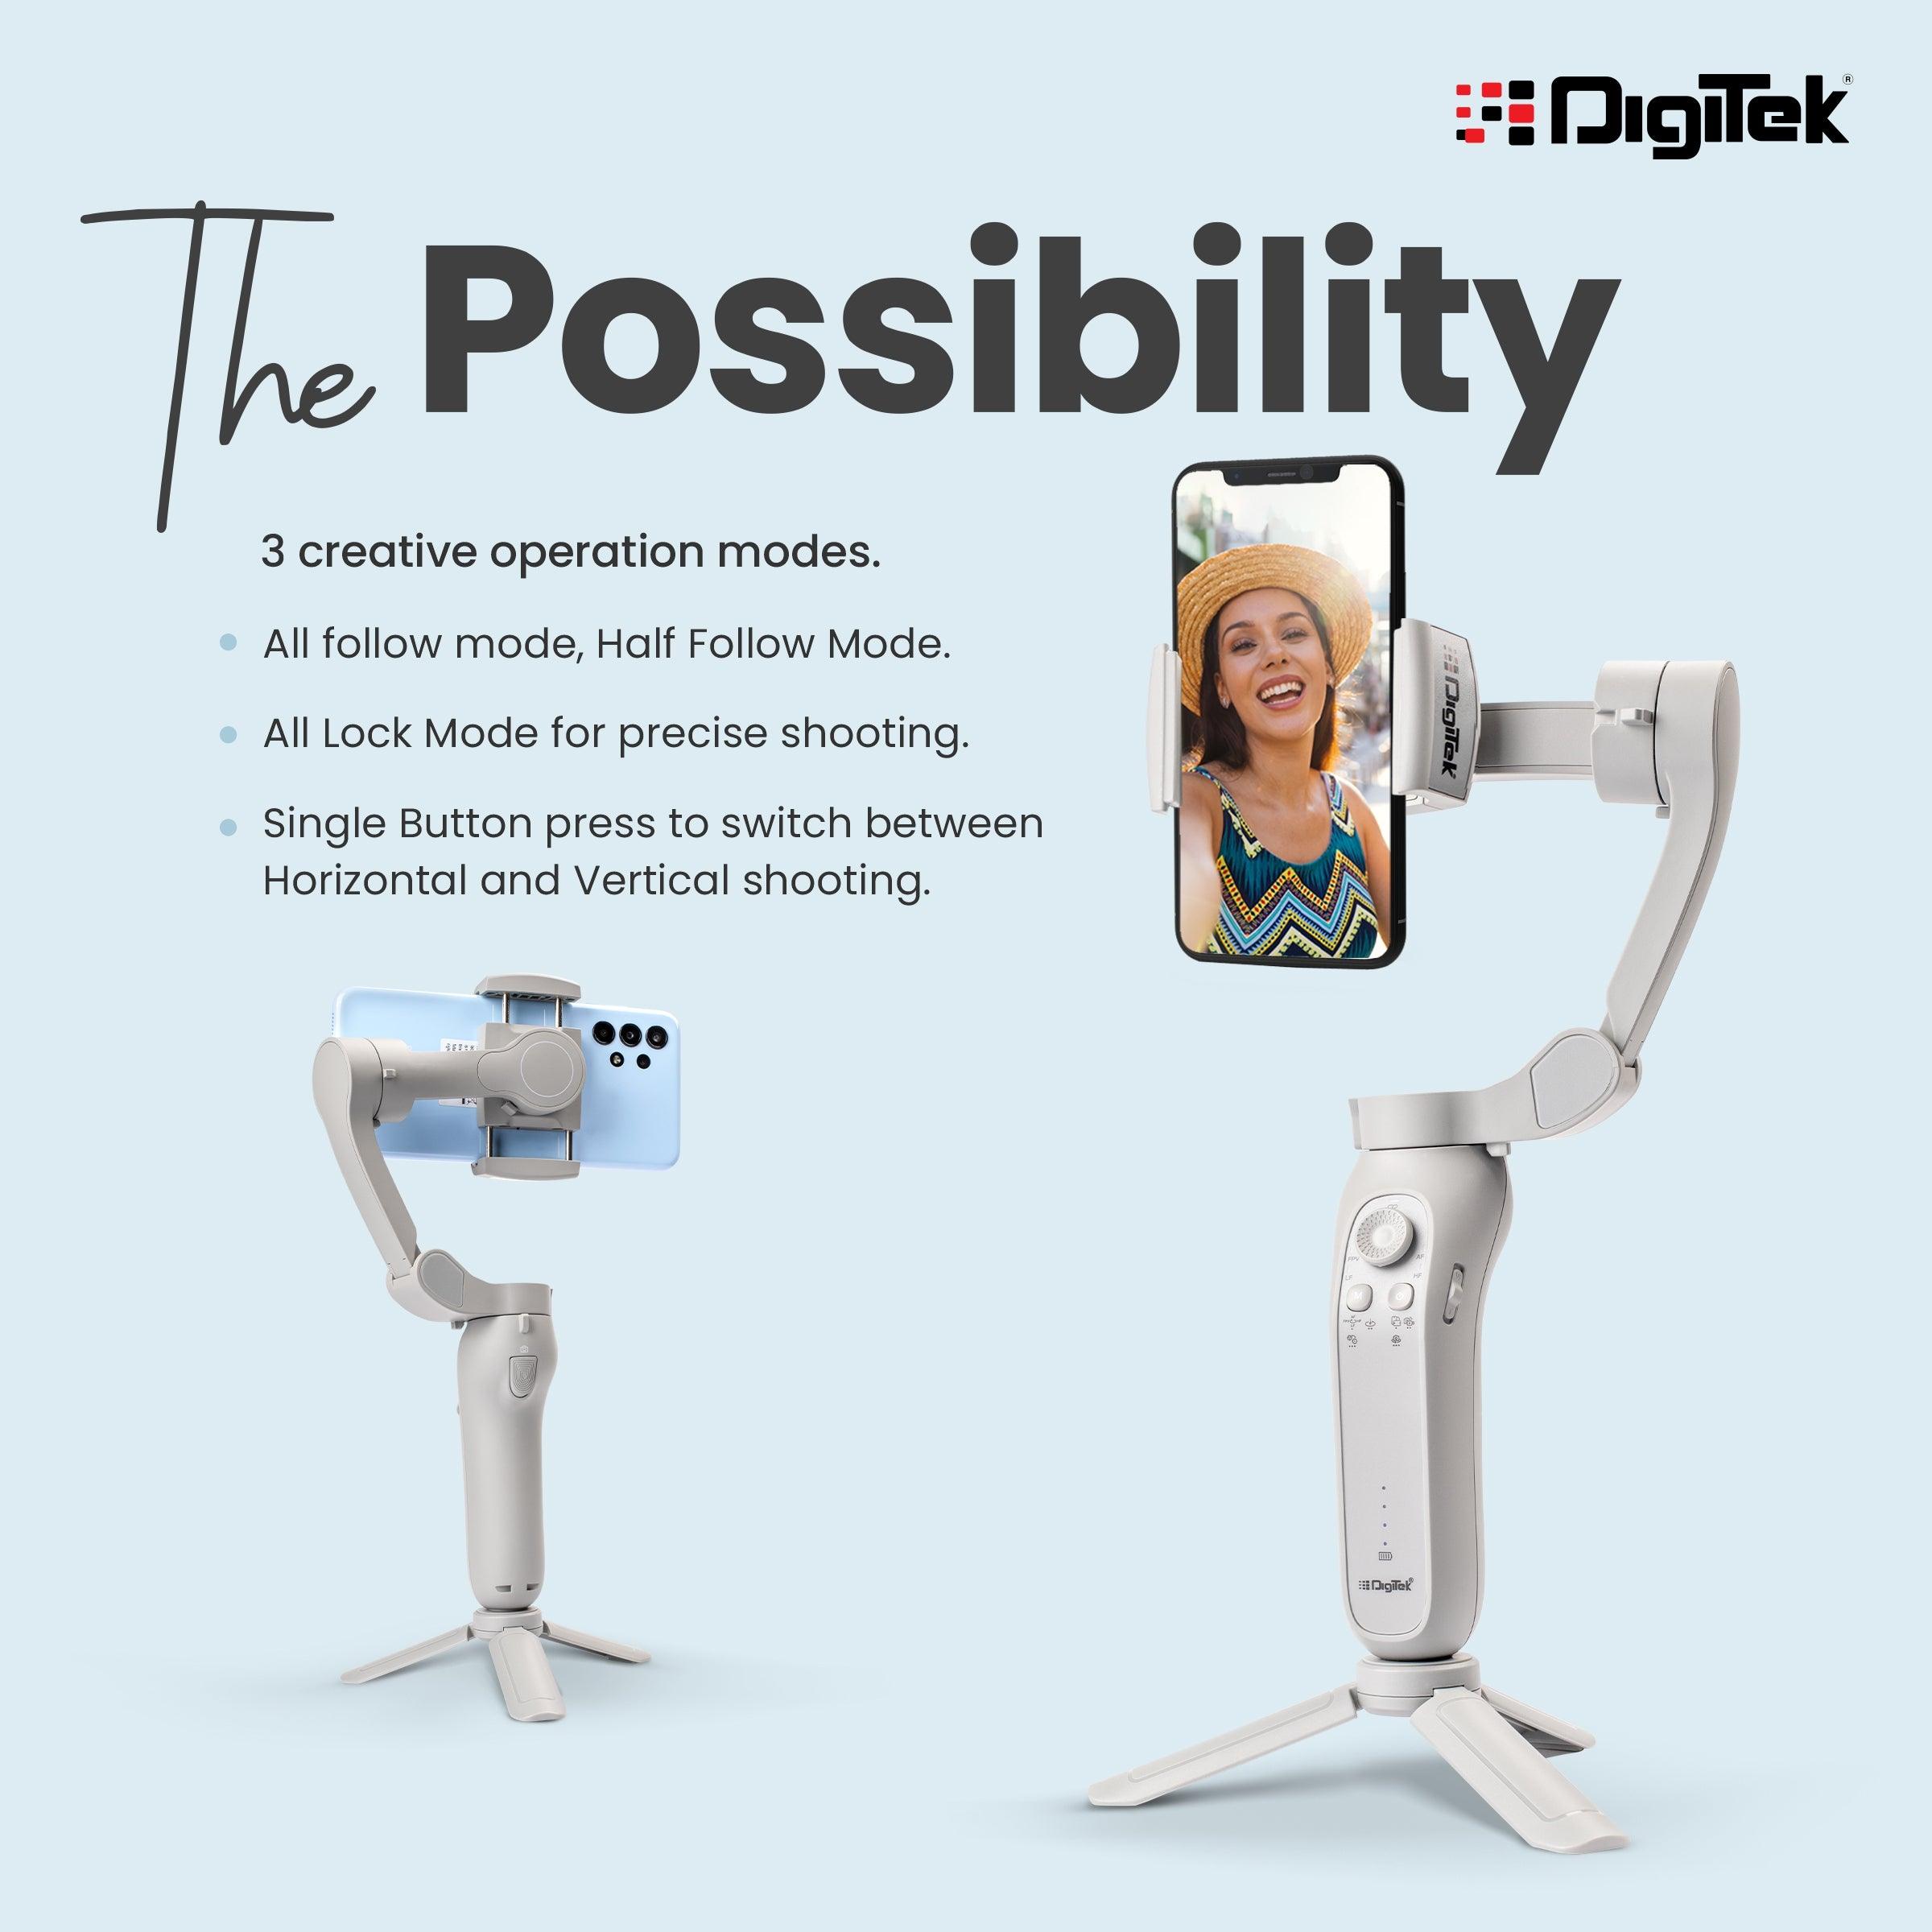 Digitek (DSG 007F) 3 Axis Handheld Steady Gimbal PTZ Camera Mount for All Smart Phones with Face & Object Tracking Motion, Various Time Lapse Features - Digitek